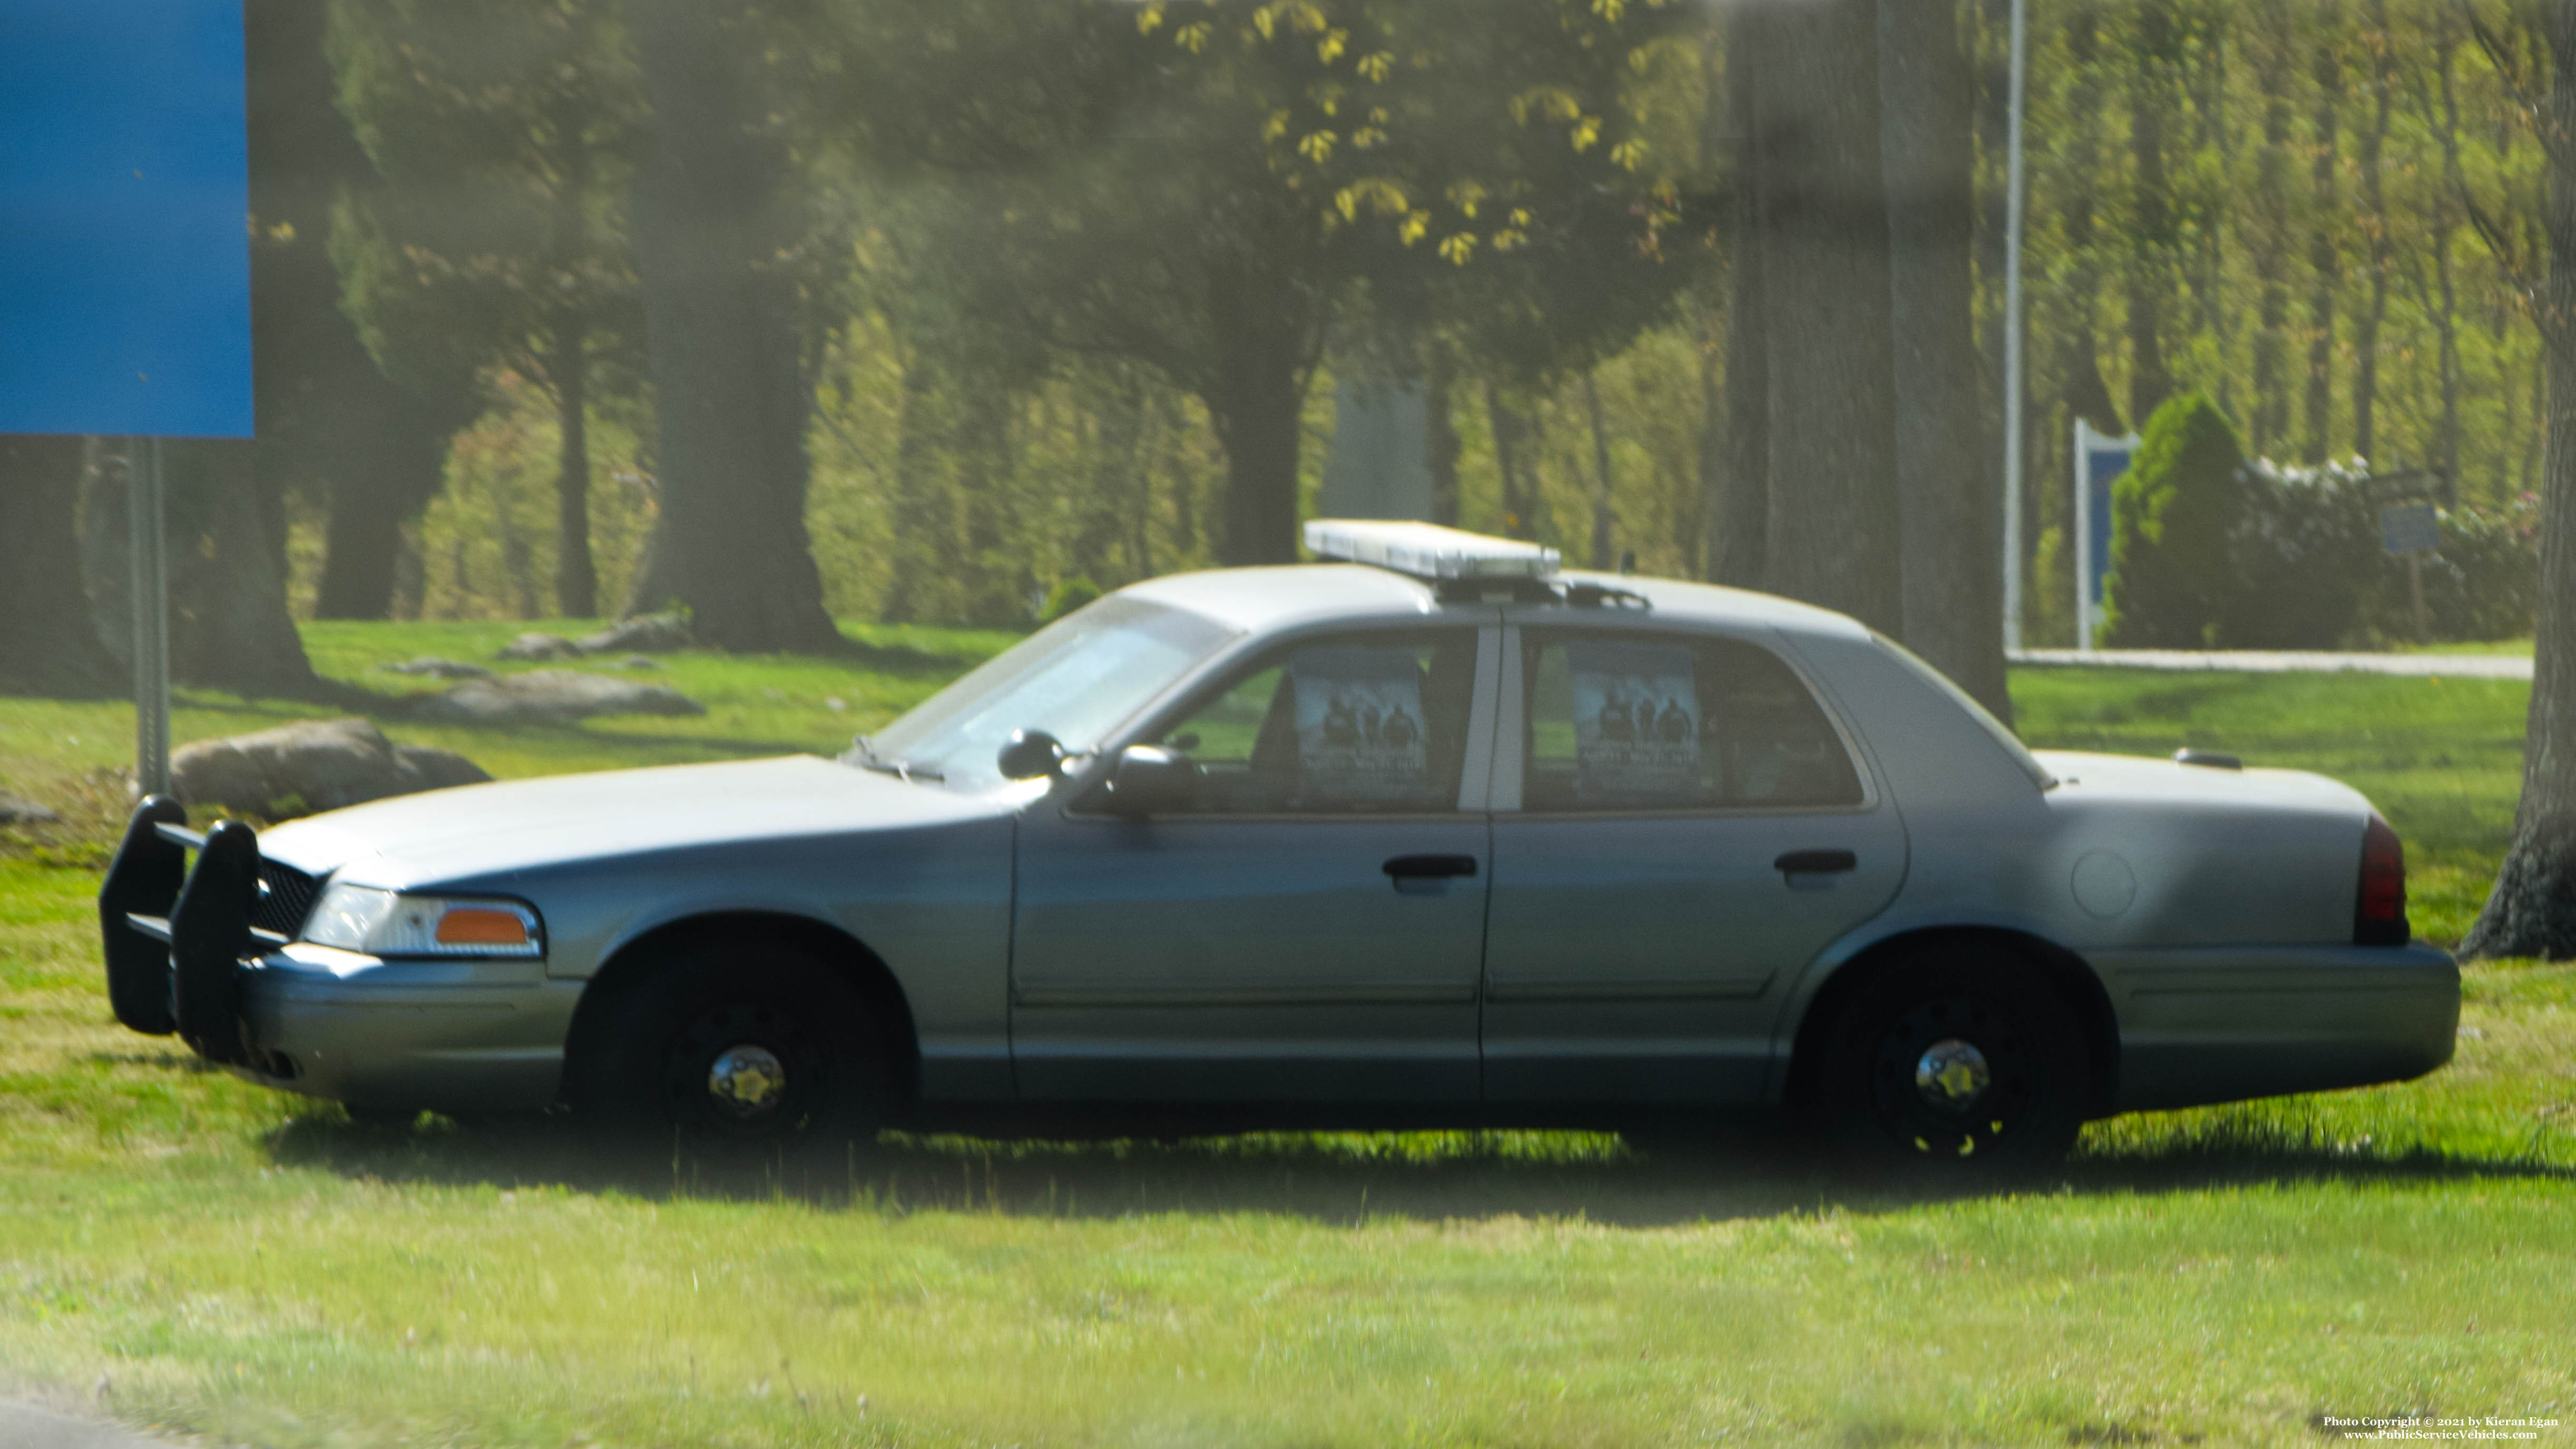 A photo  of Connecticut State Police
            Cruiser 162, a 2009-2011 Ford Crown Victoria Police Interceptor             taken by Kieran Egan